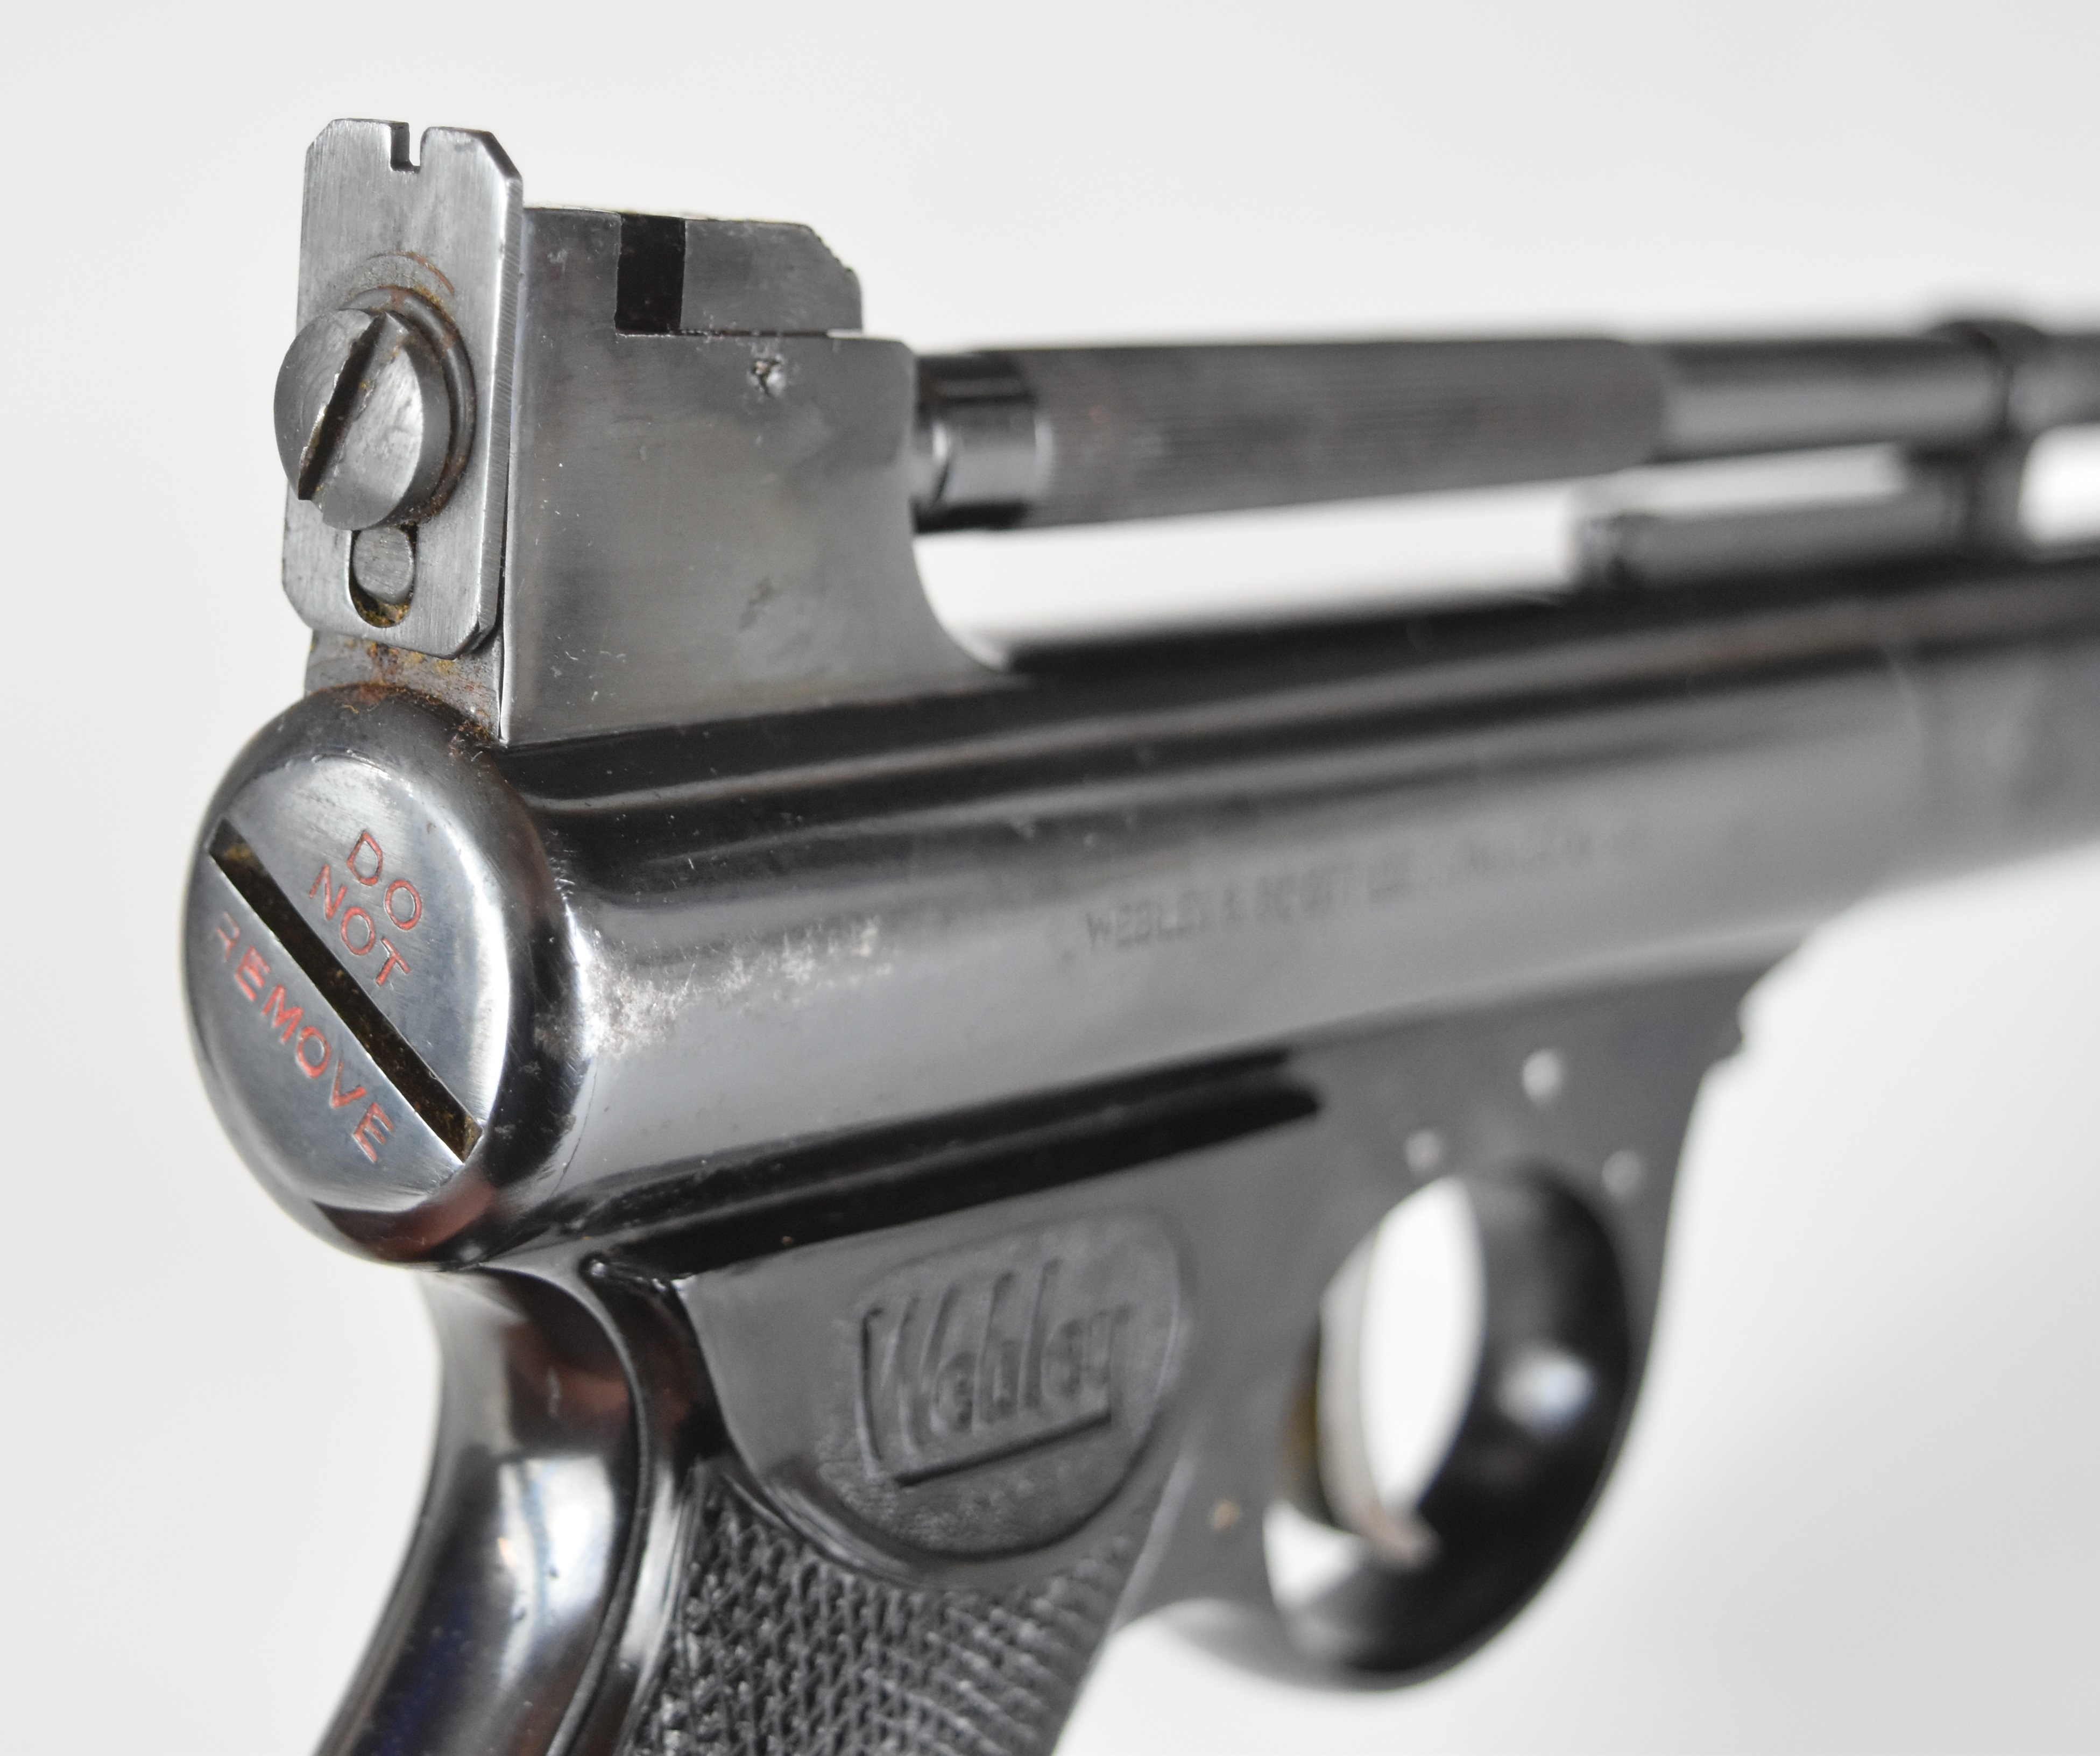 Webley Mark 1 .177 air pistol with named and chequered grips and adjustable sights and trigger, - Image 12 of 15